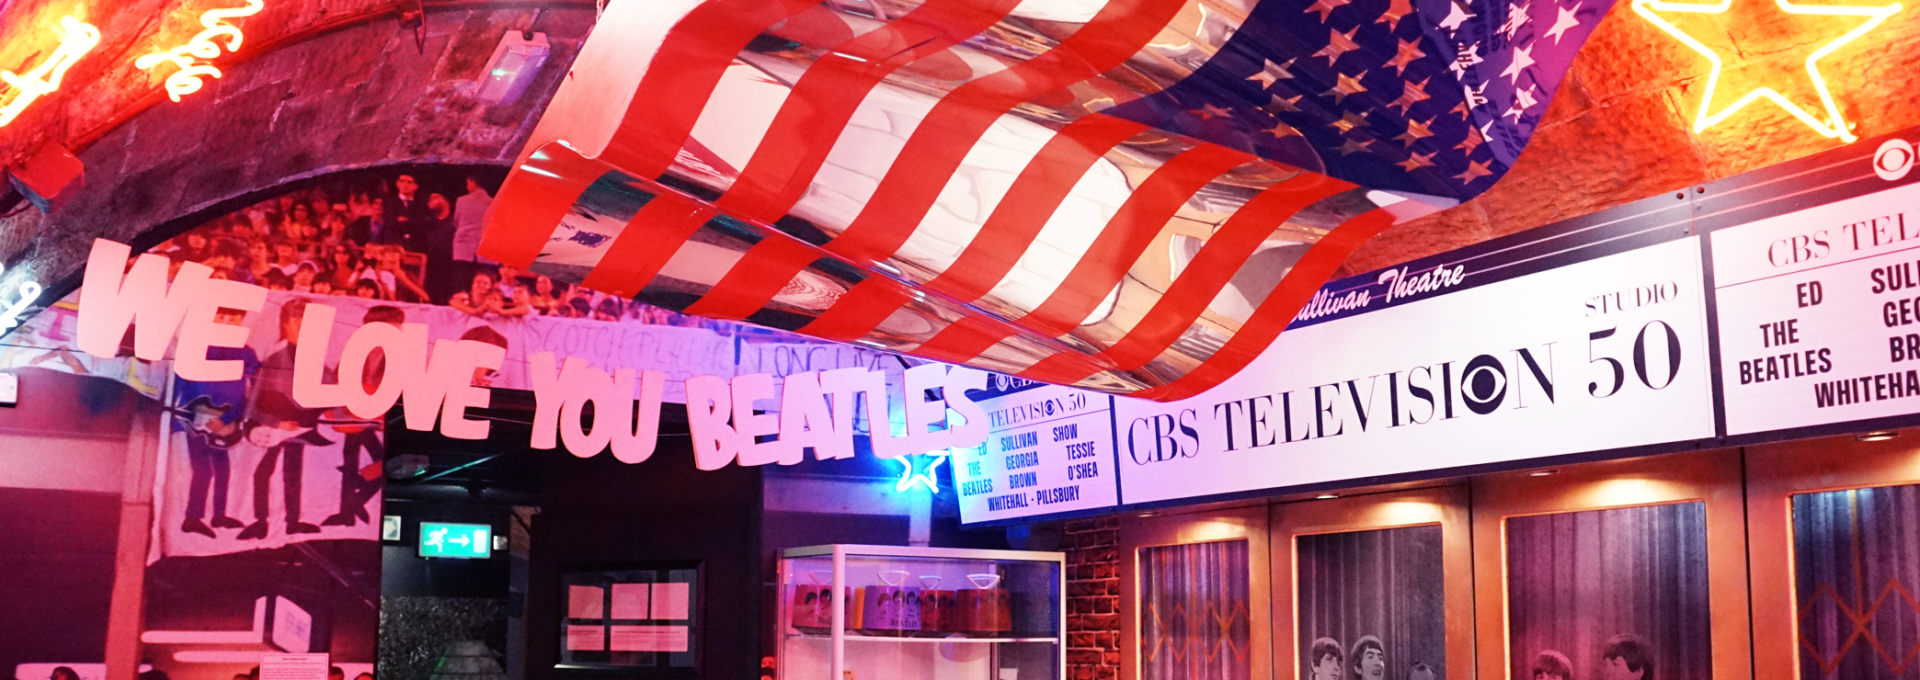 USA room at The Beatles Story